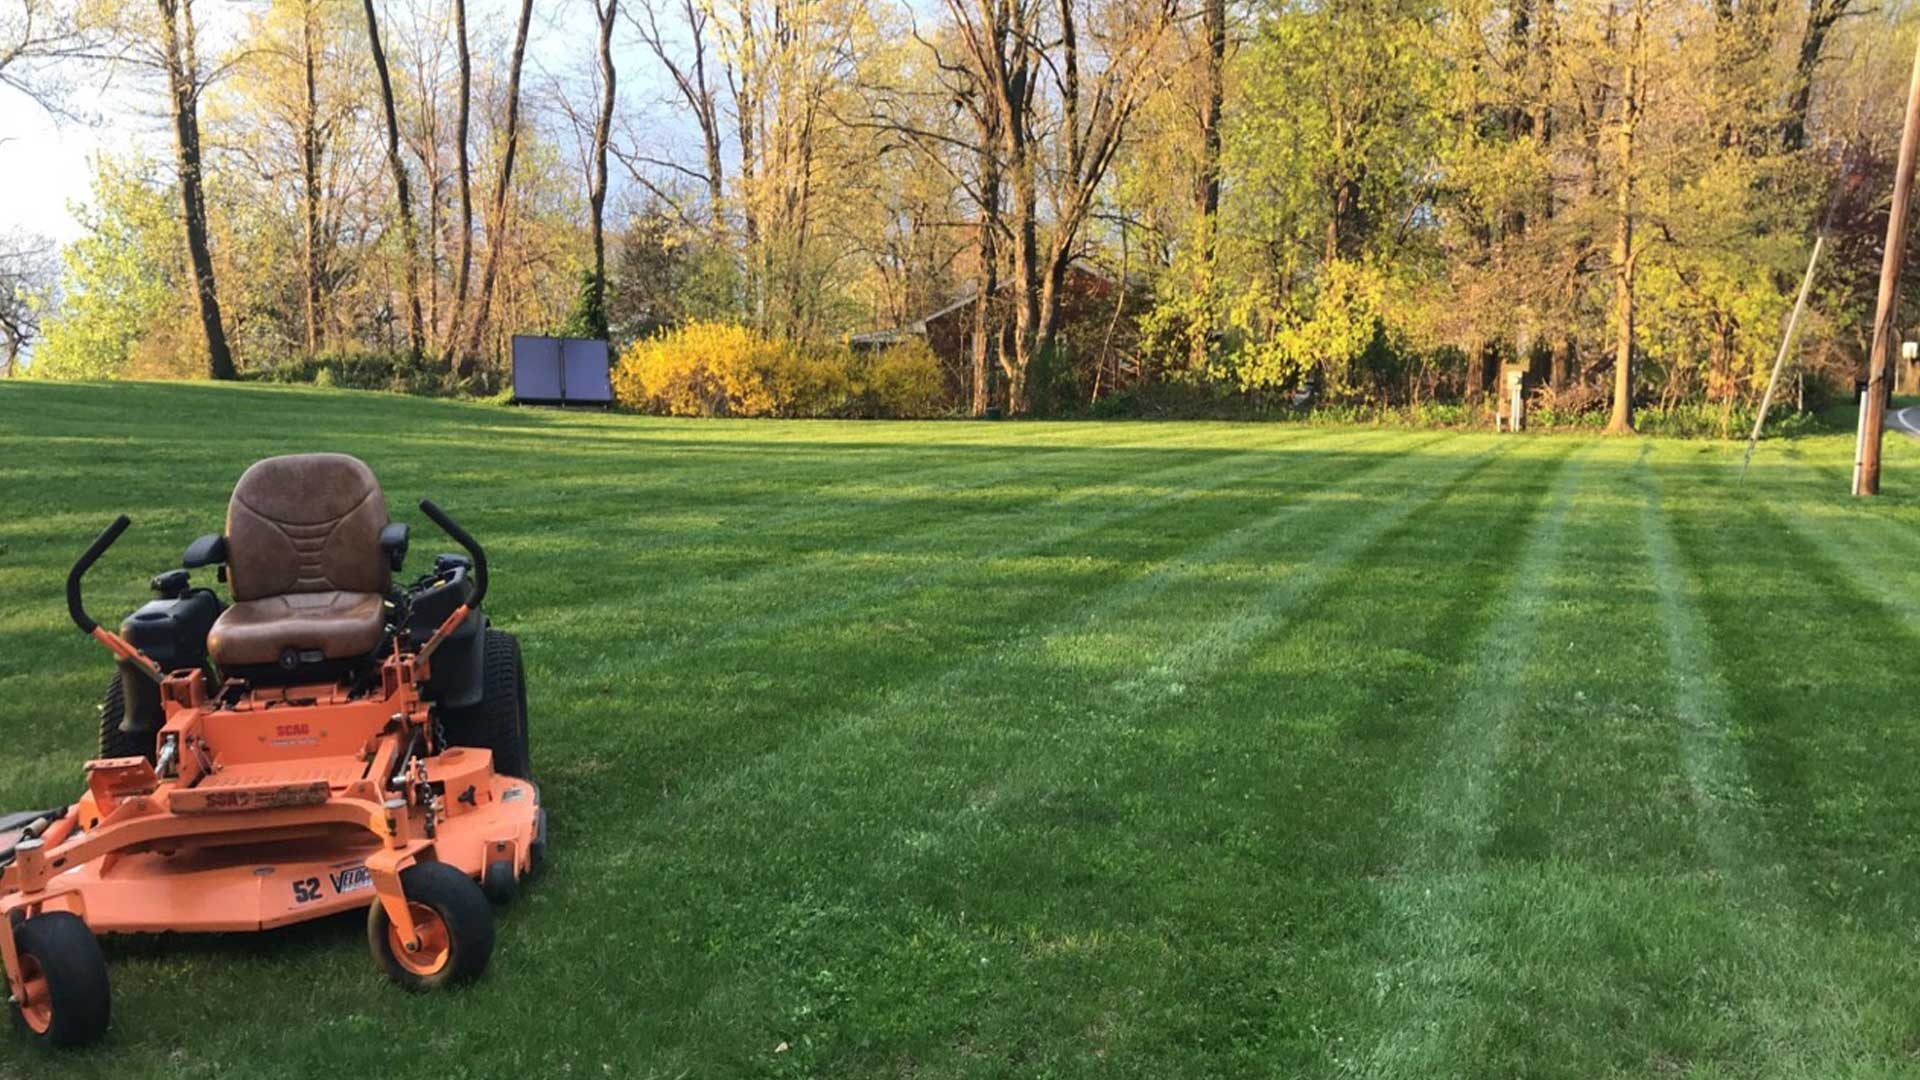 Our lawn mower parked on a lawn that was recently mowed by our team.